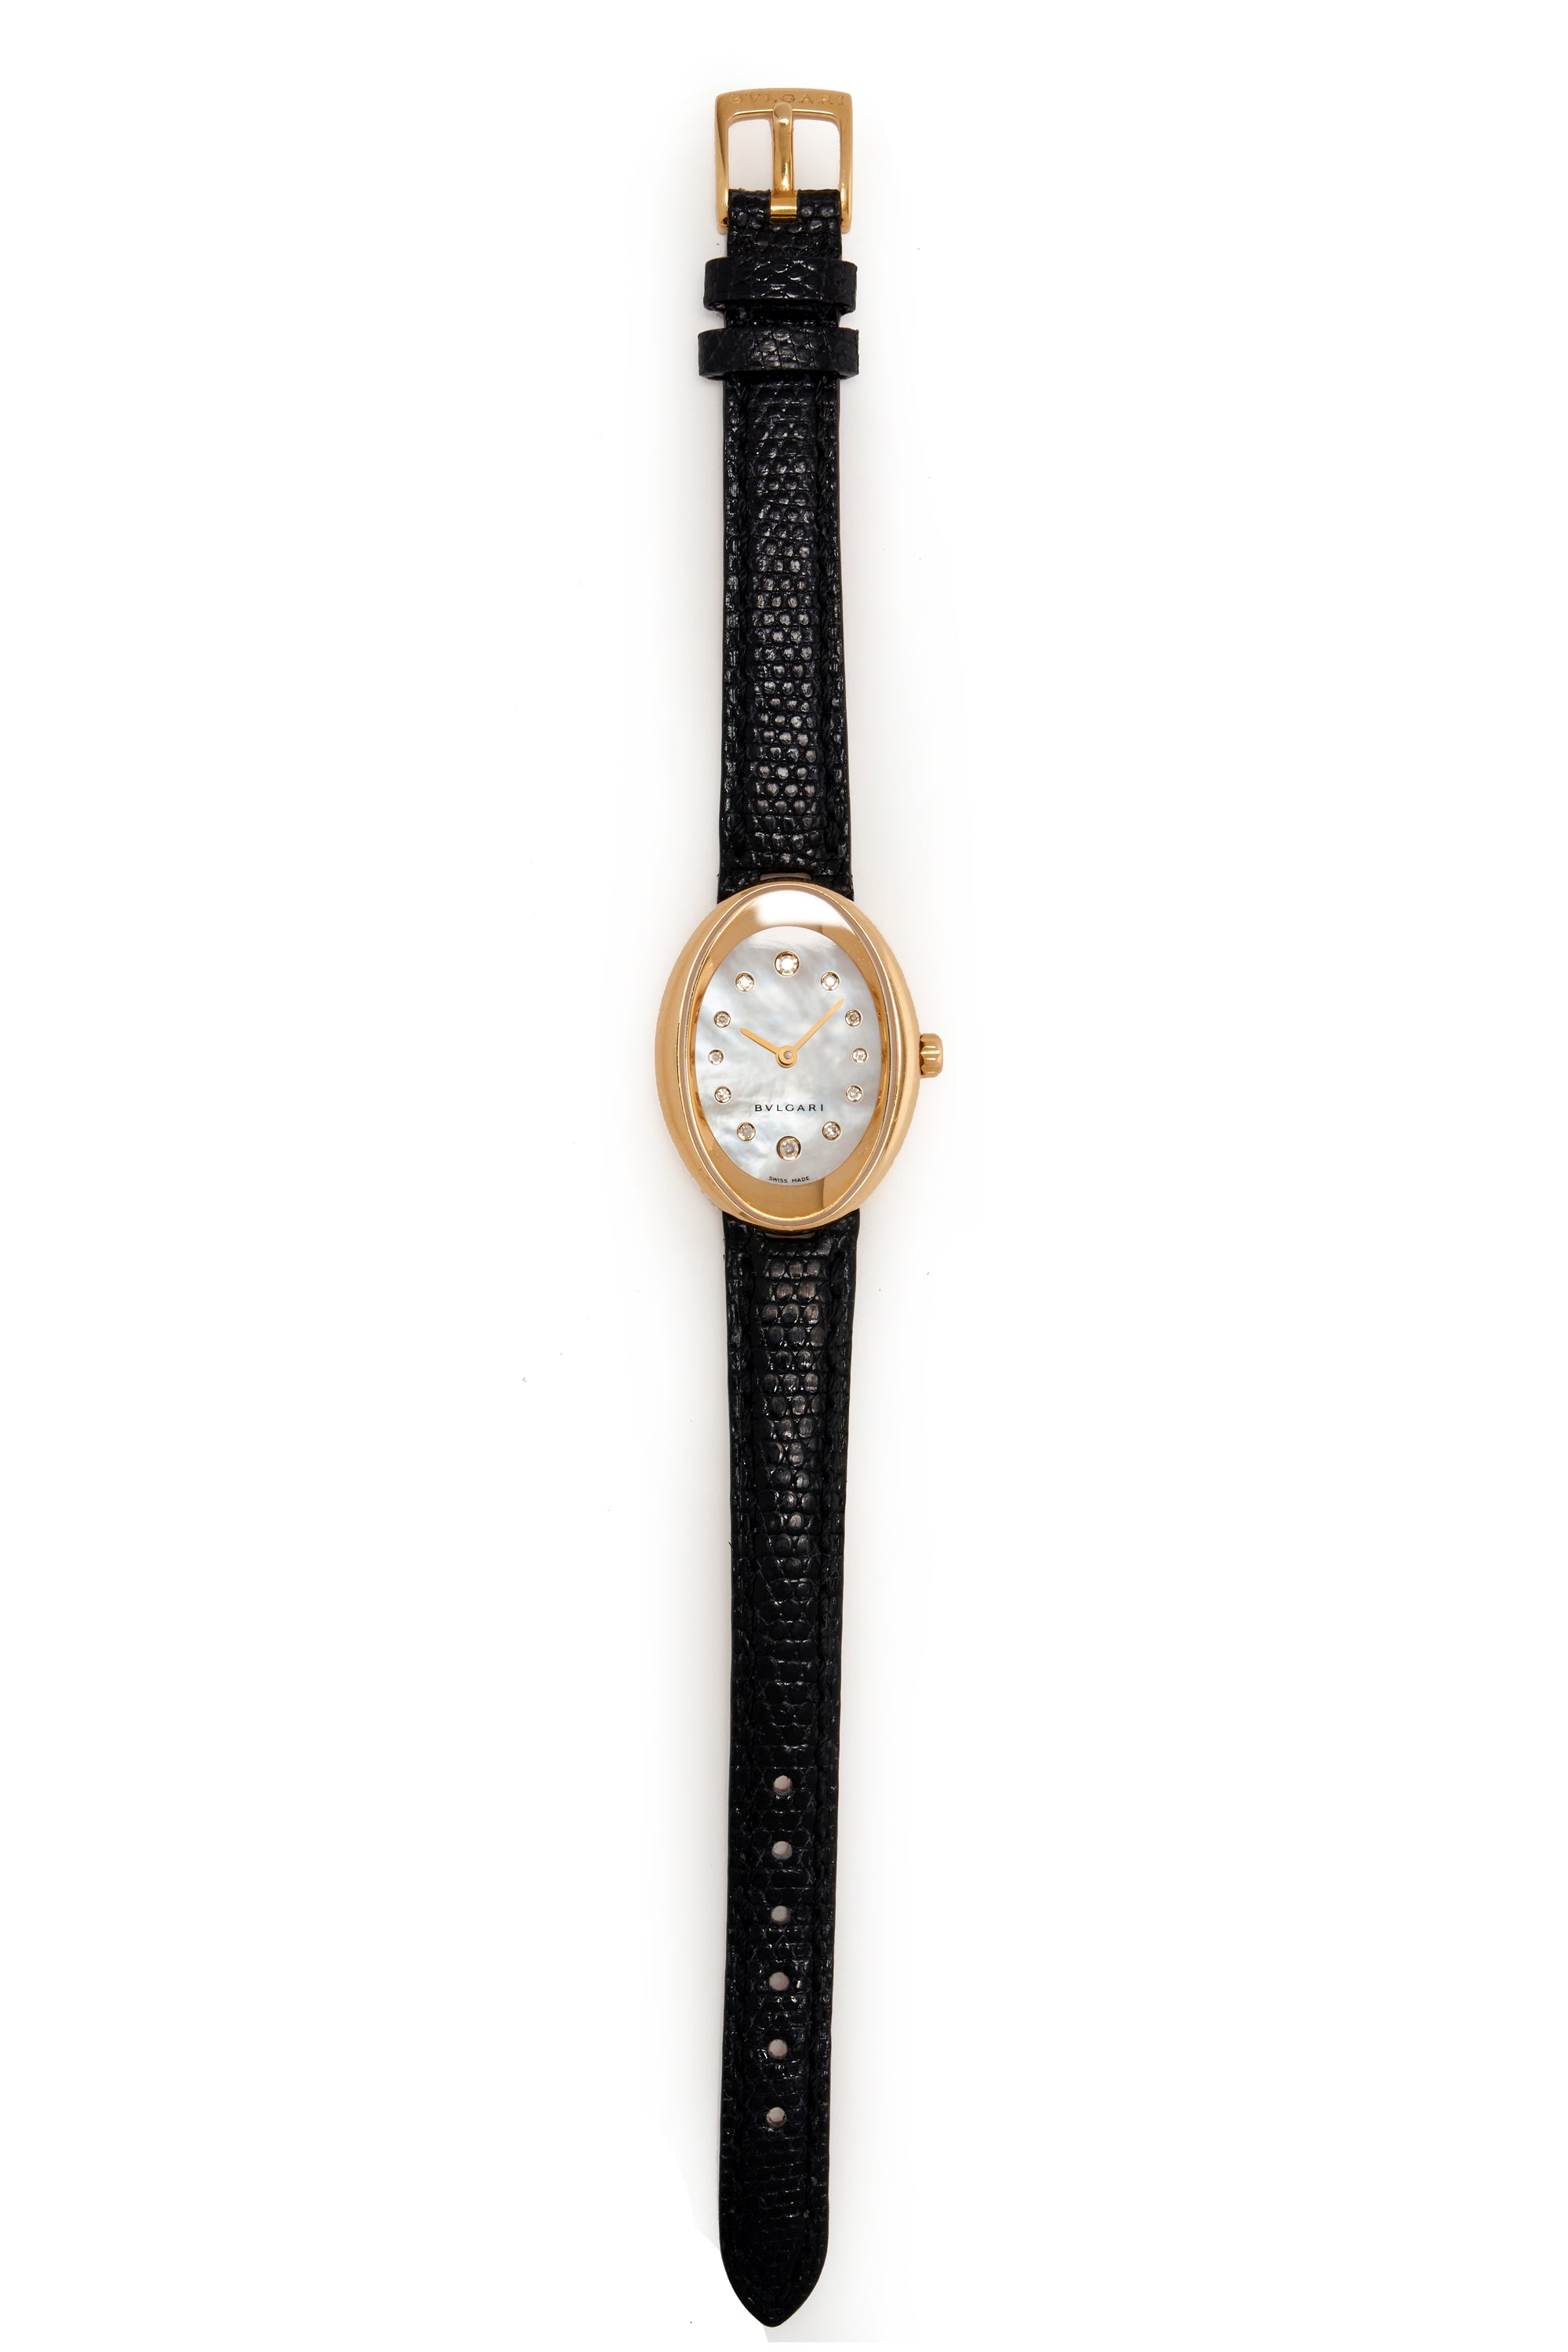 Bulgari Mother of Pearl Face Watch With Diamonds